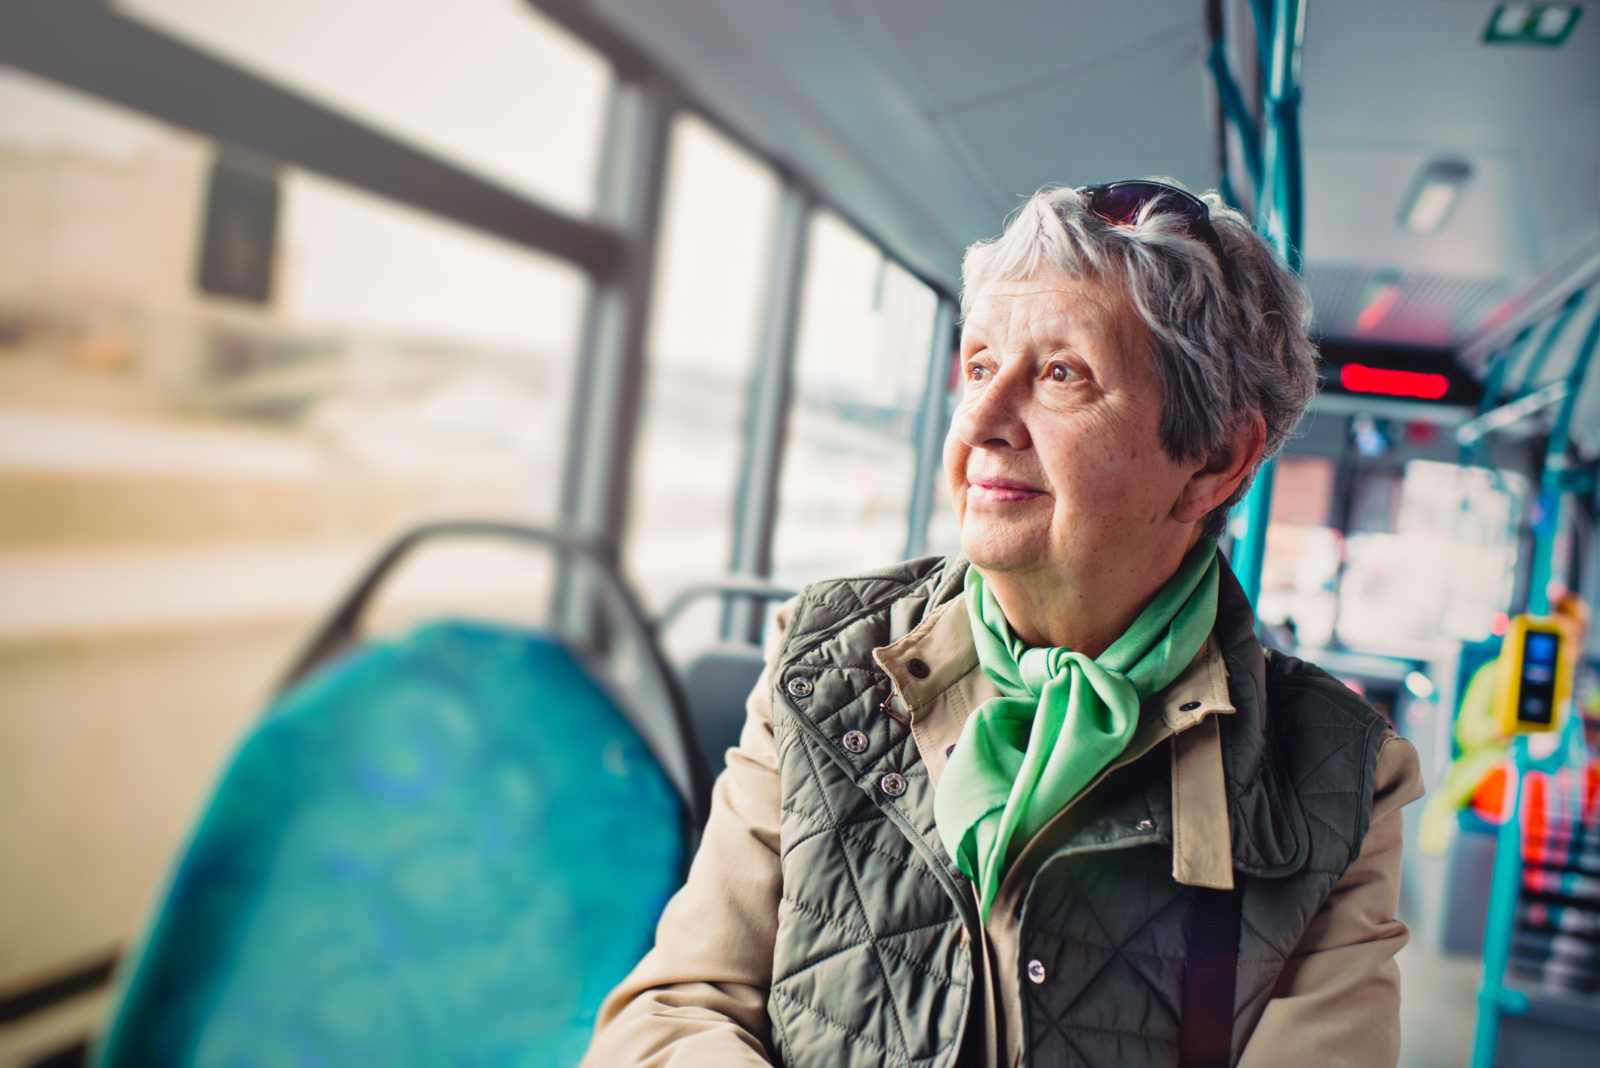 Senior woman in the bus